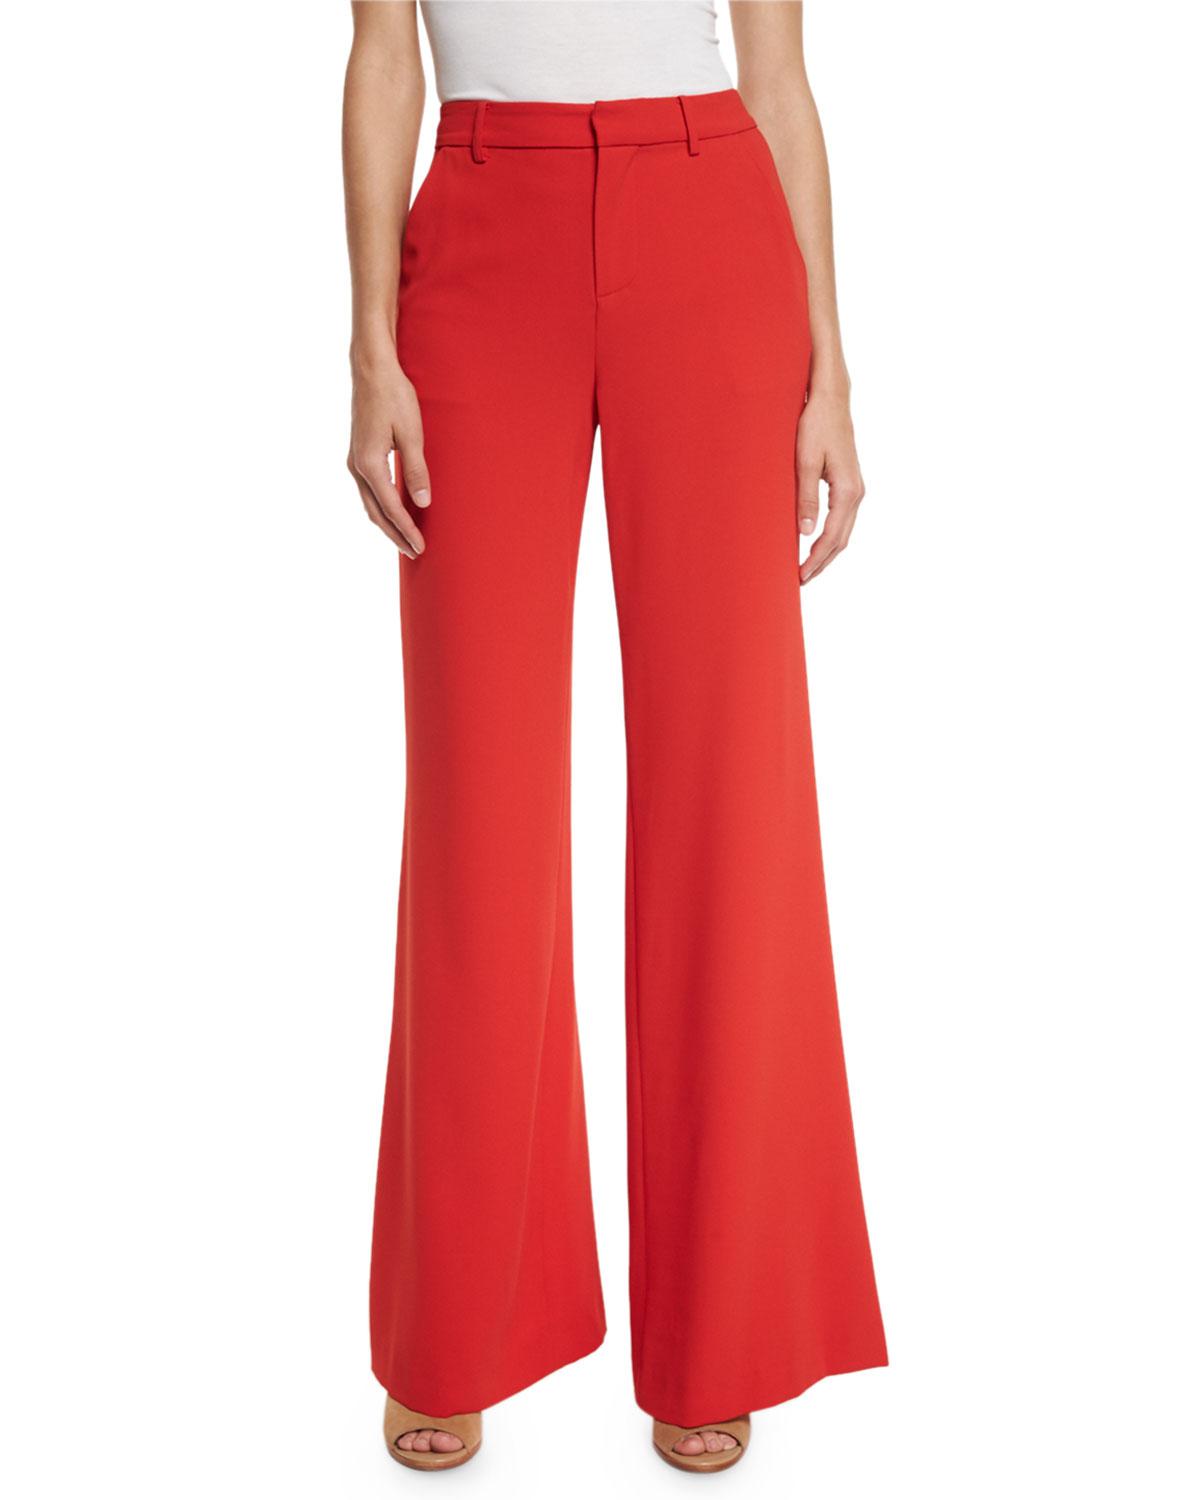 Alice + Olivia Synthetic Paulette High-waist Wide-leg Pants in Red - Lyst